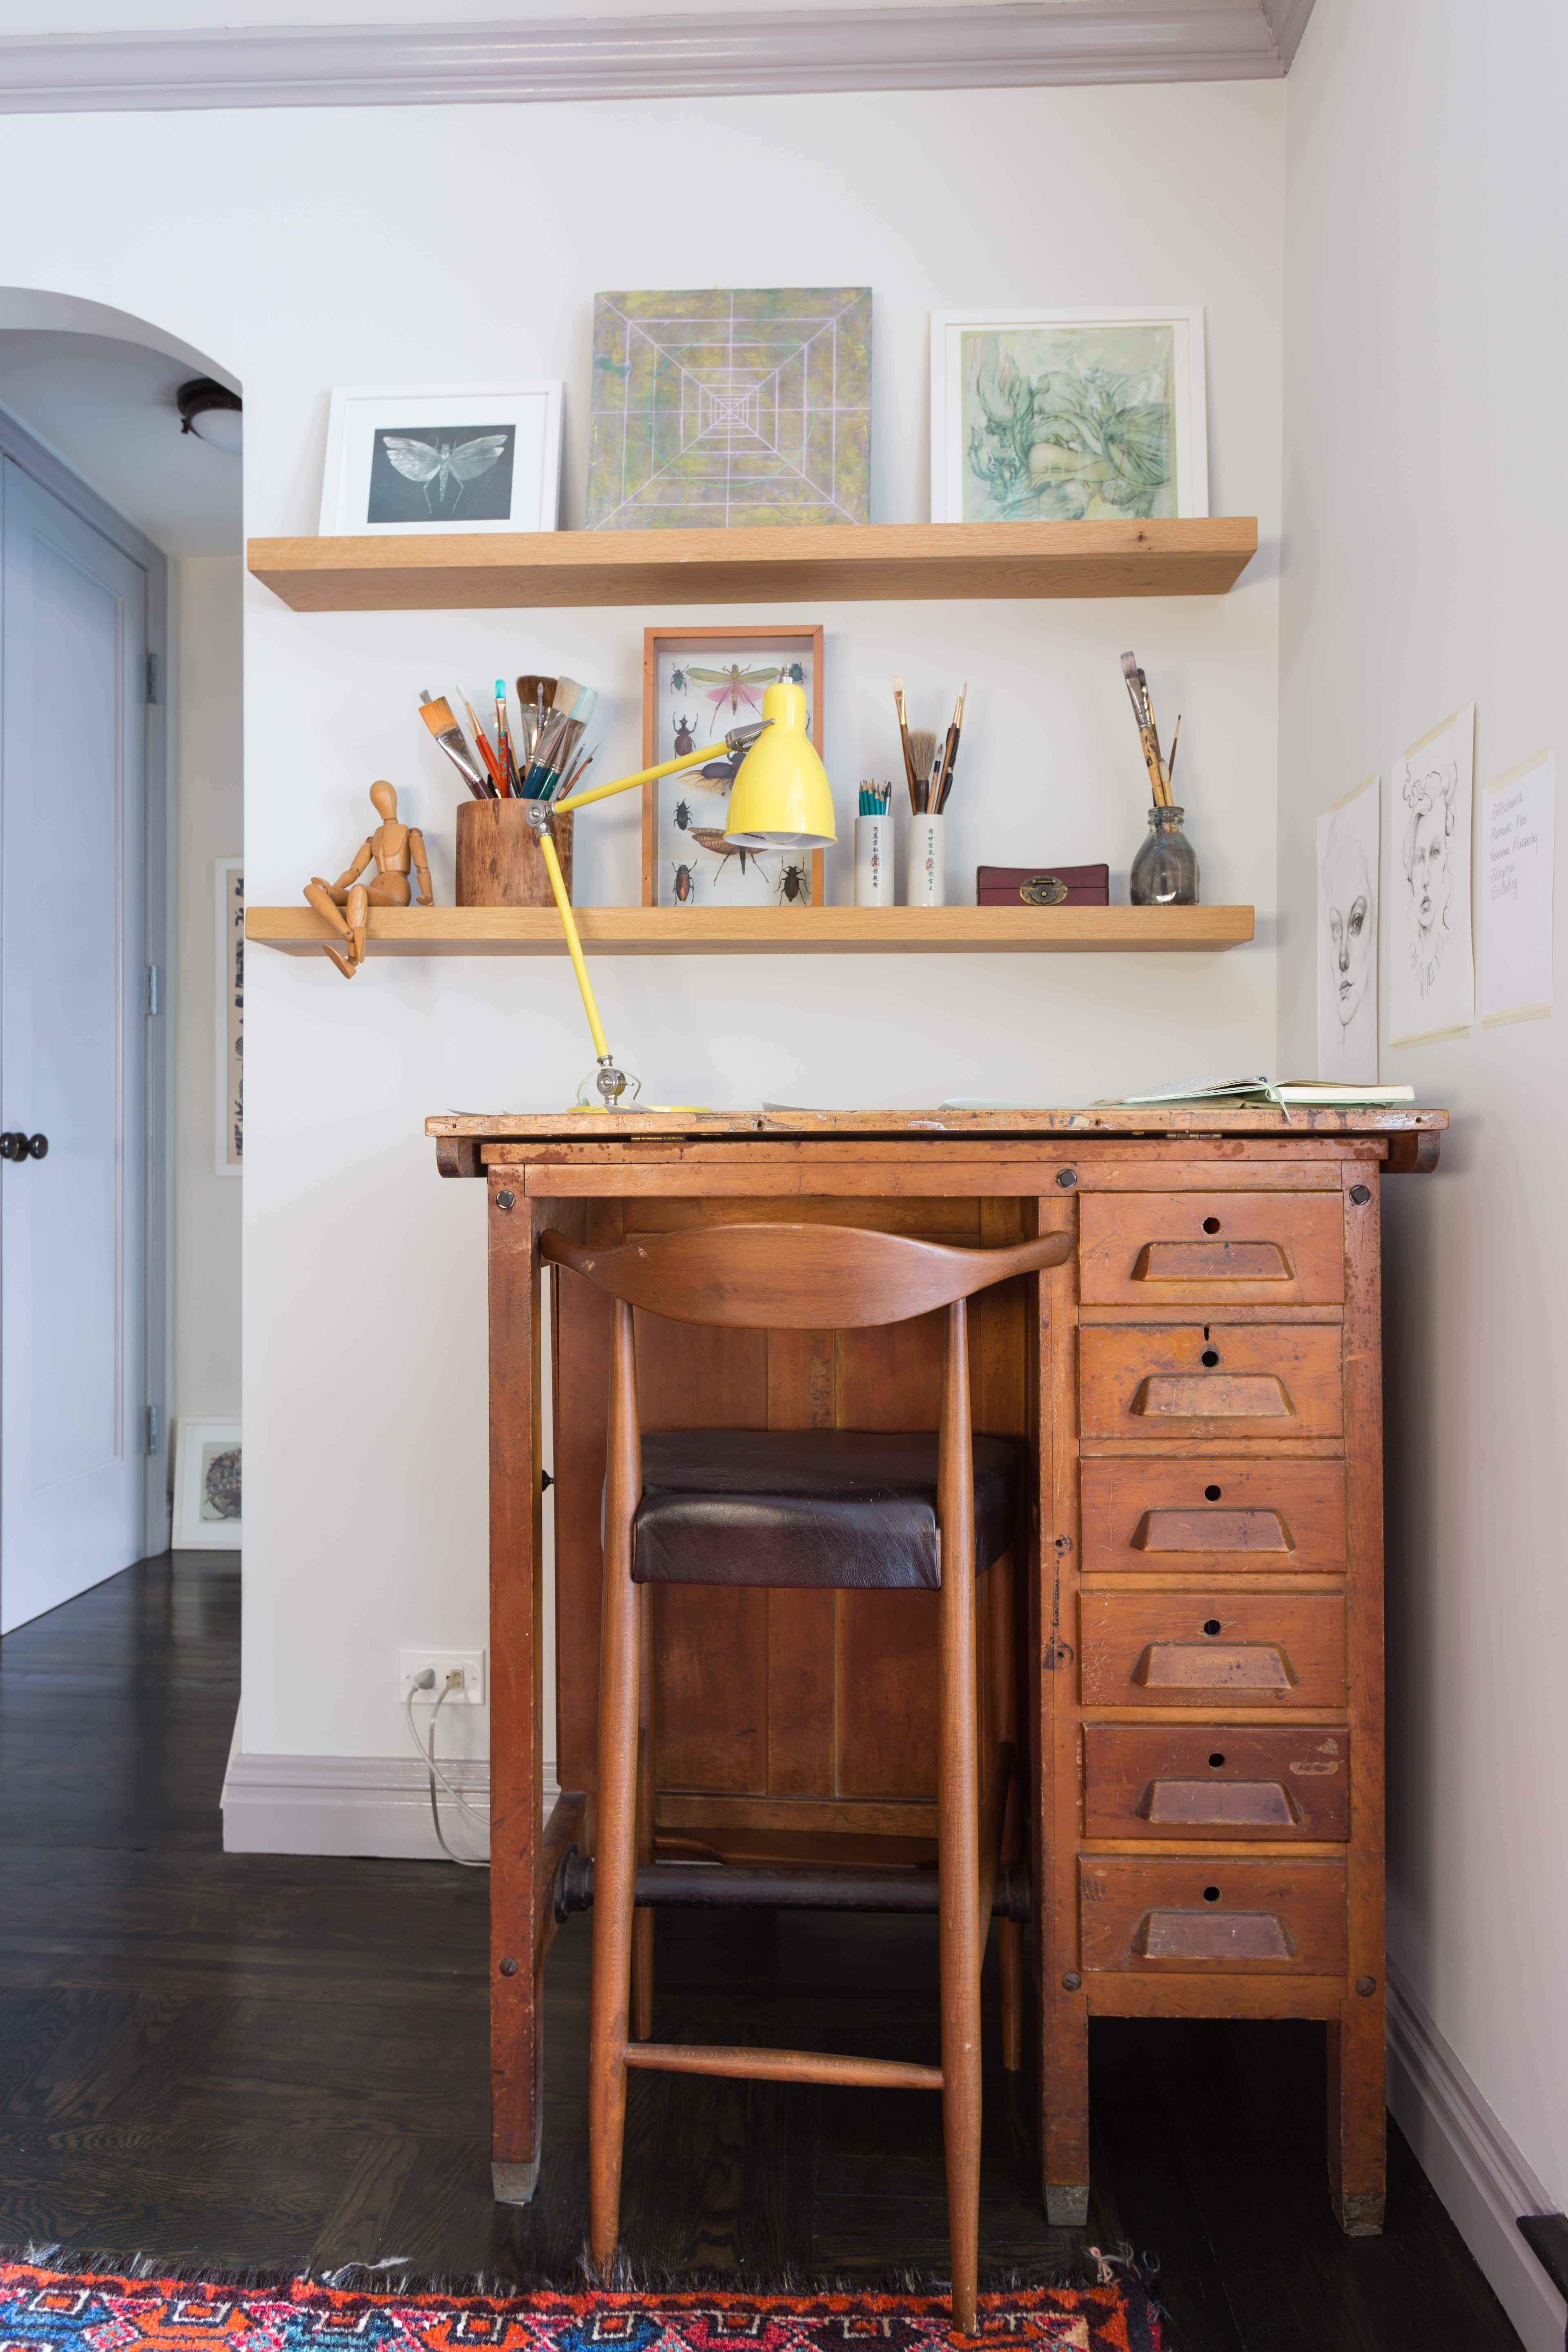 House Tour: An Artist's 450-Square-Foot NYC Studio | Apartment Therapy